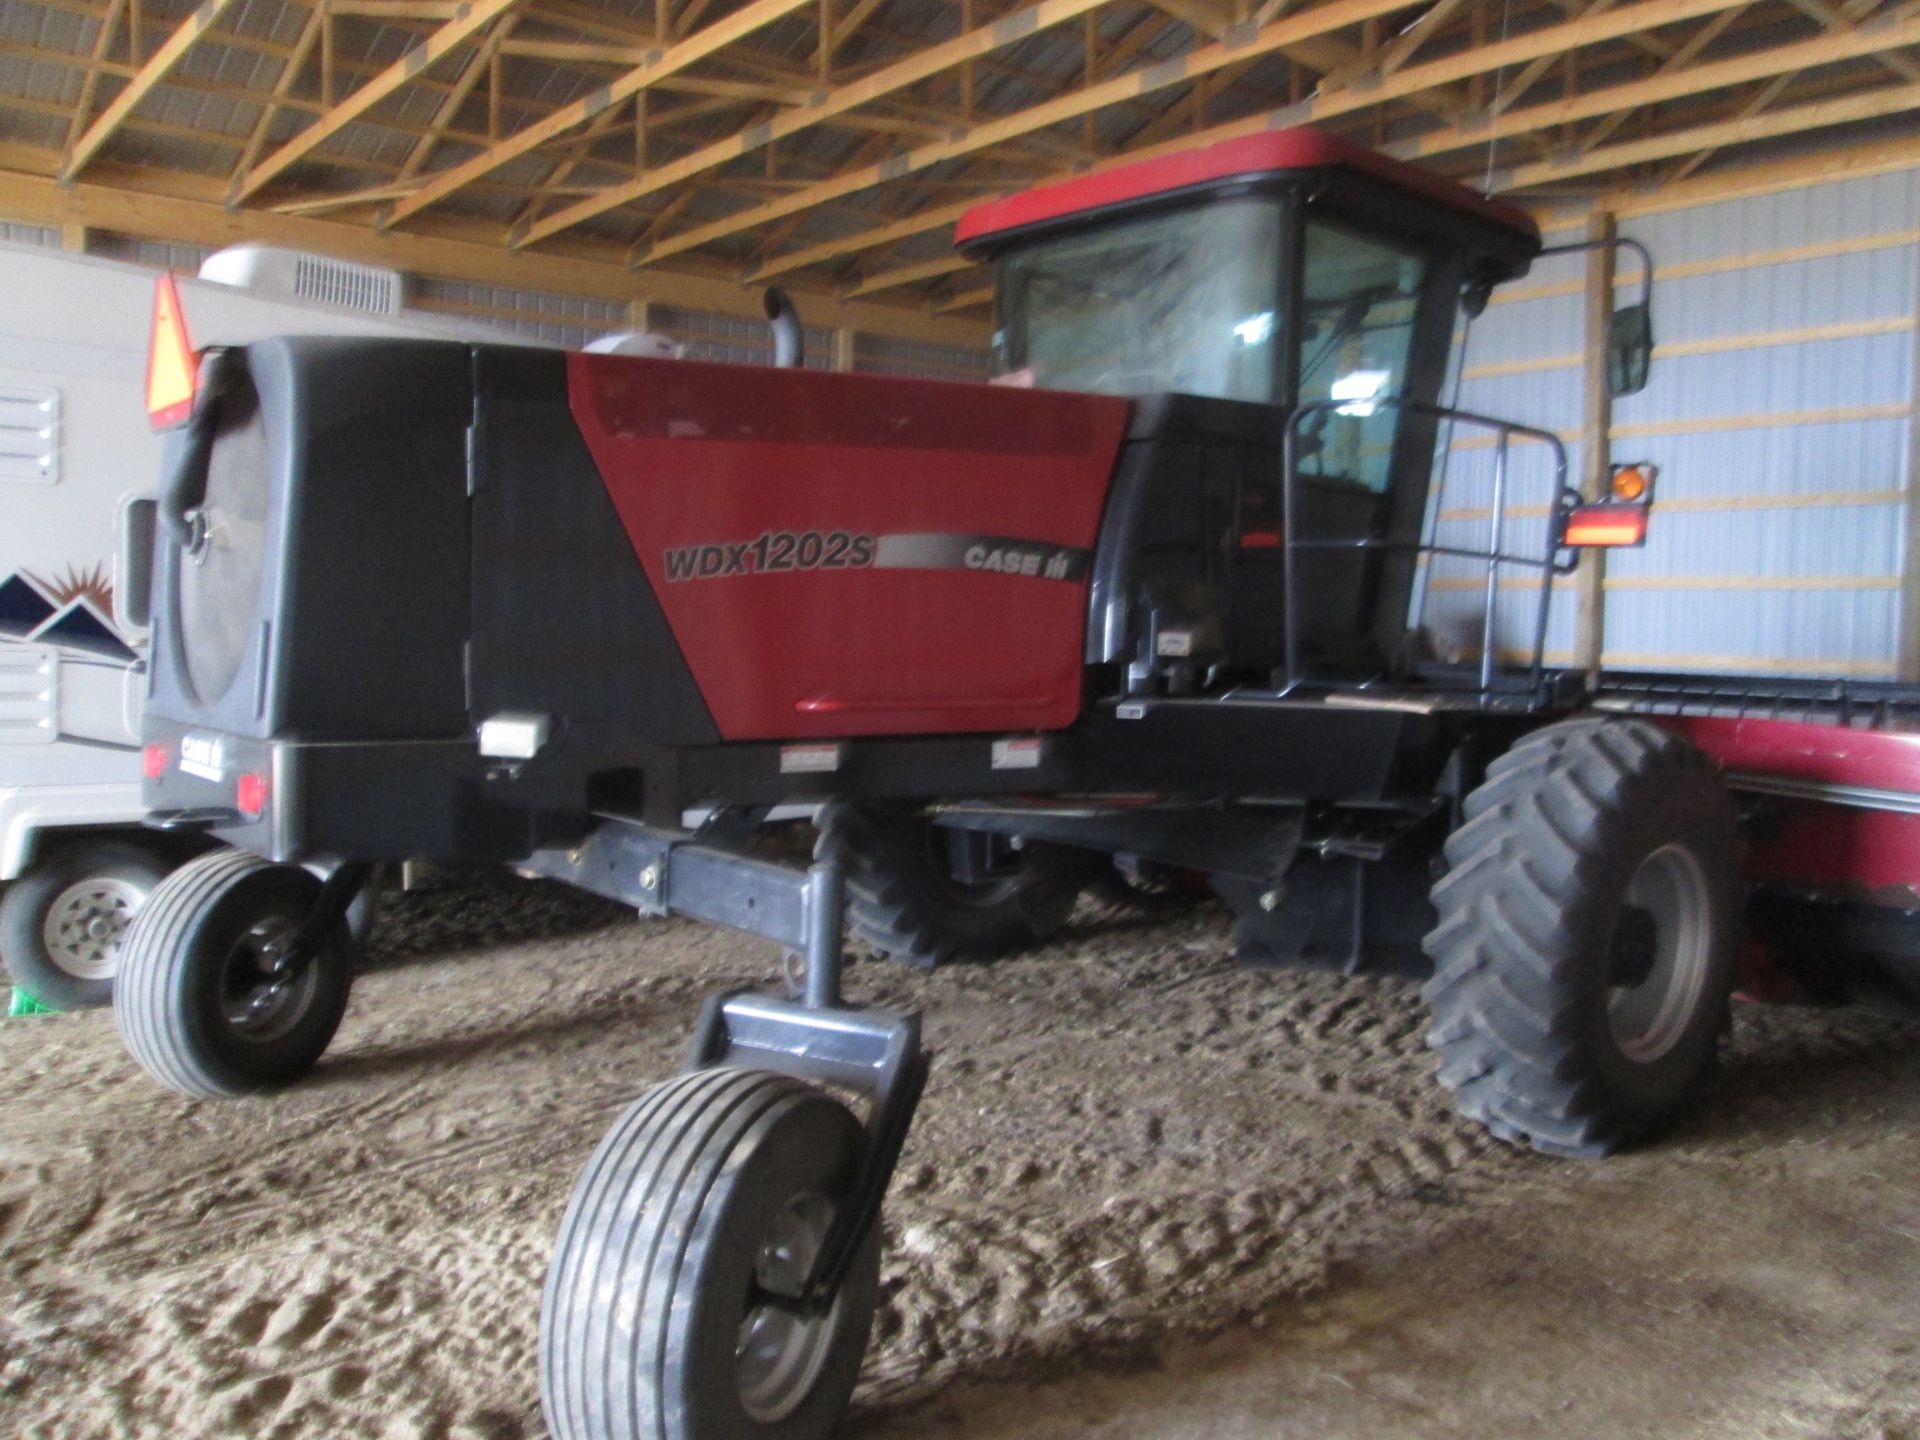 Case WDX 1202 S swather (2005), c/w 30' DHX 302 header (2007), showing 795 eng hr, dbl knife - Image 8 of 32